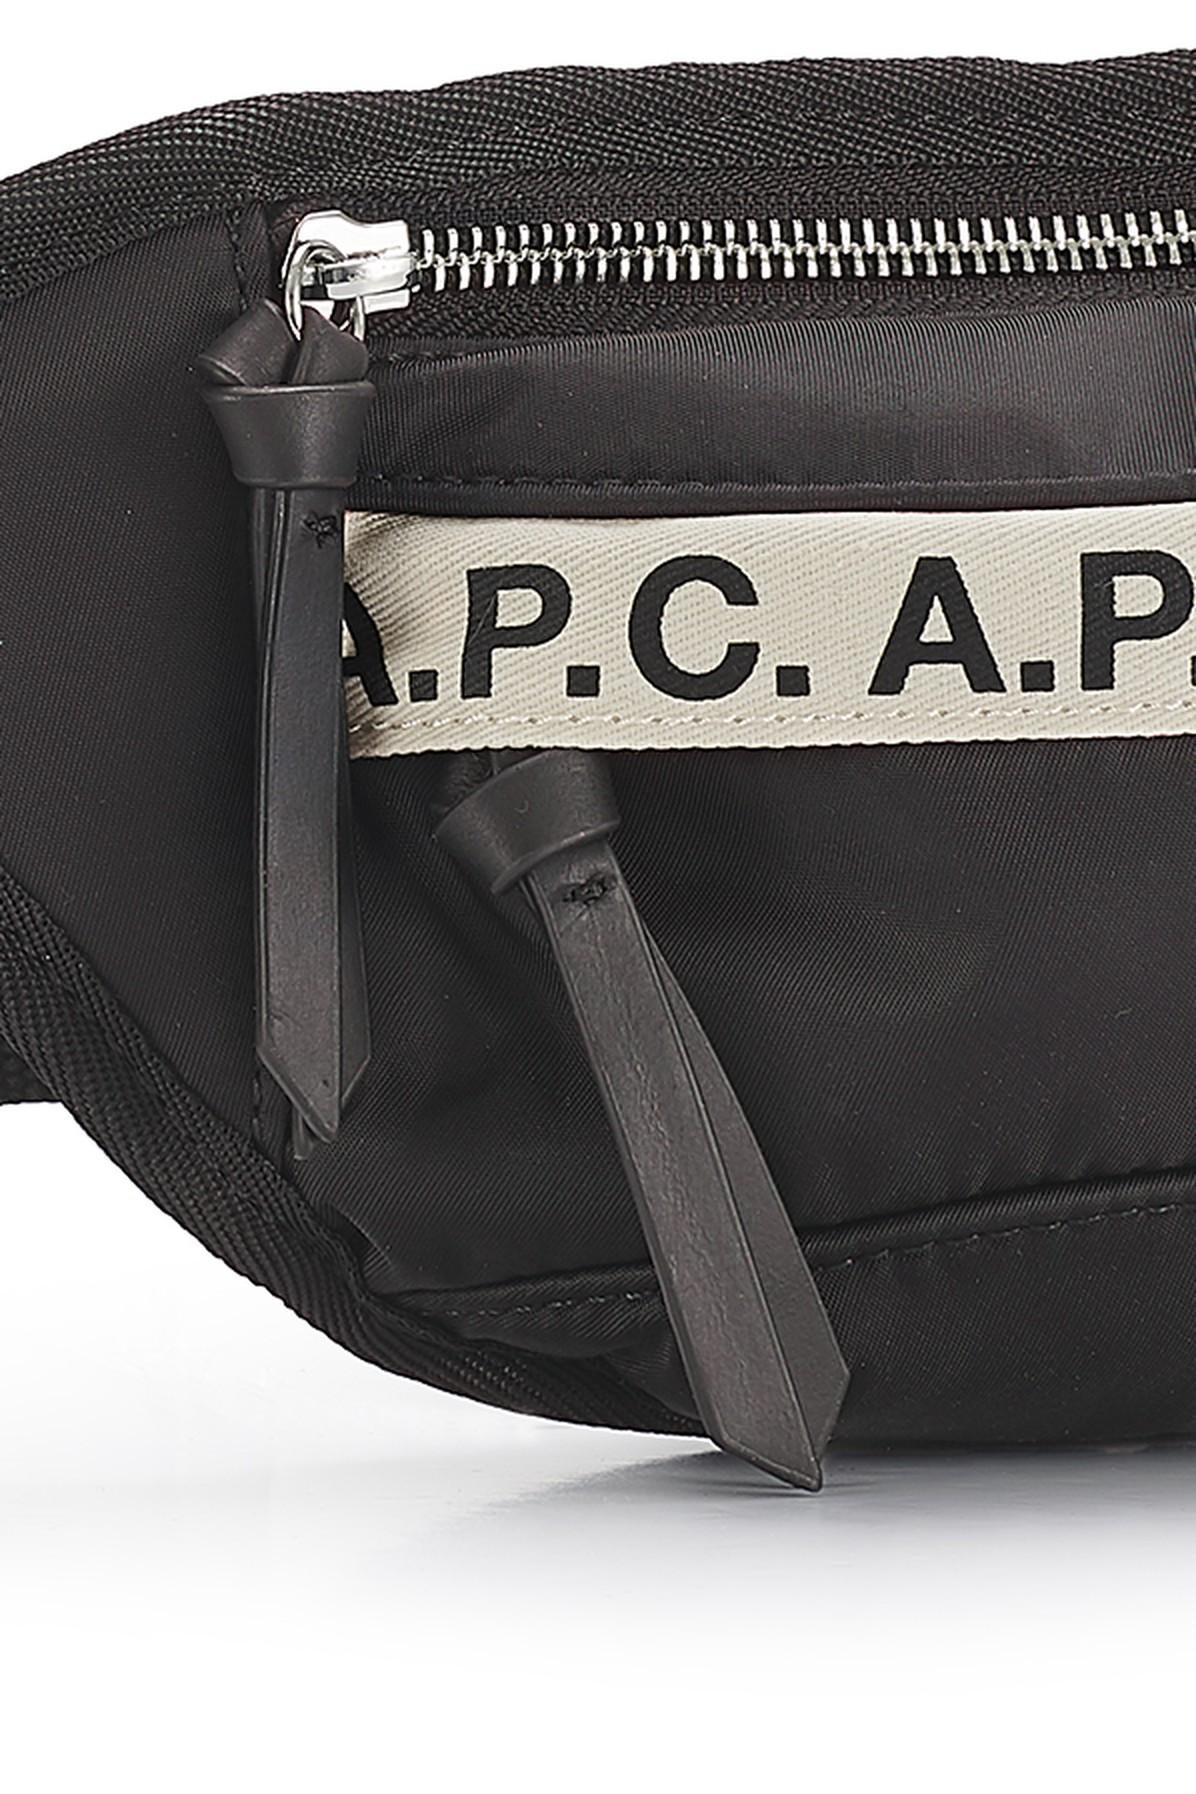 A.P.C. Synthetic Mini Repeat Bum Bag in Black for Men - Save 60% - Lyst